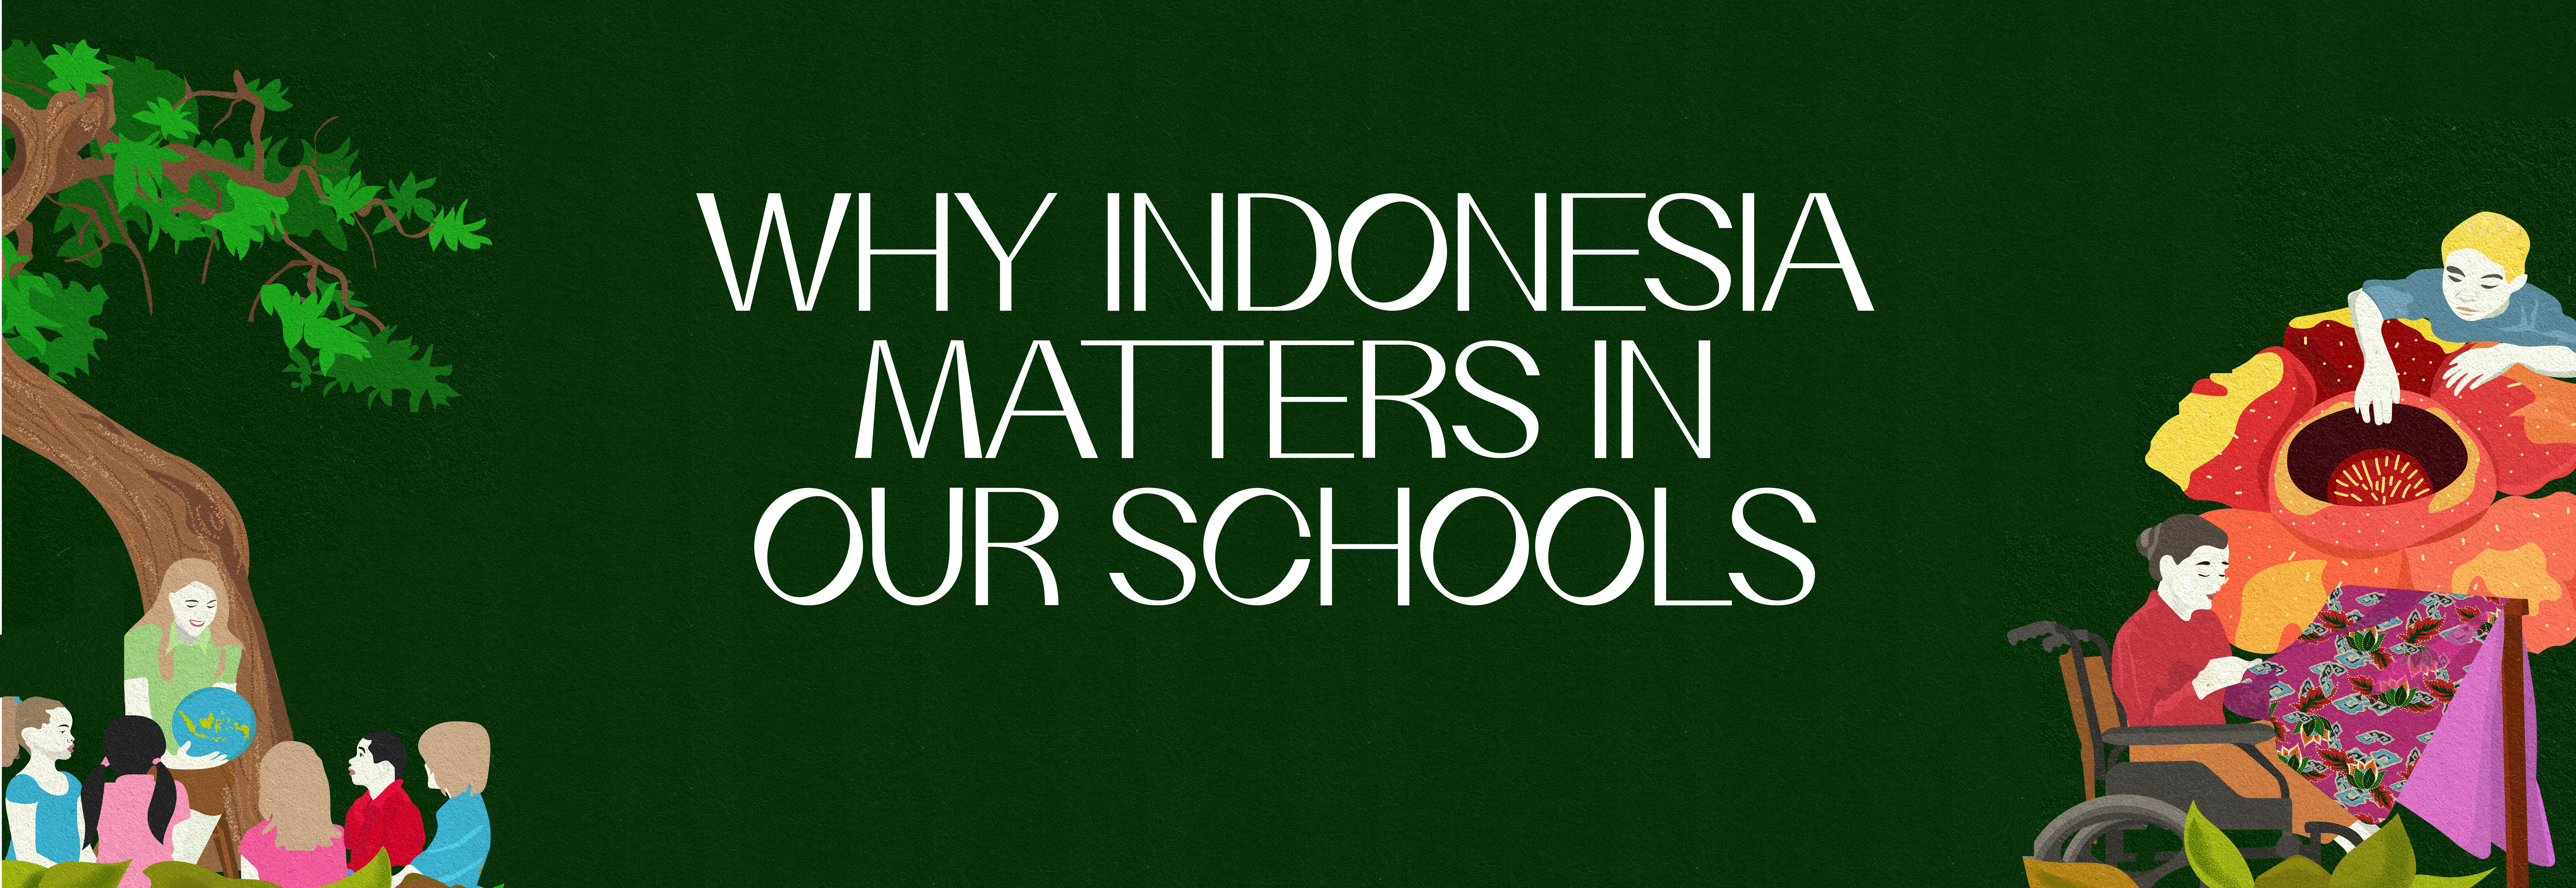 AEF_Why Indonesia matters in our schools_Banner_2021_with text